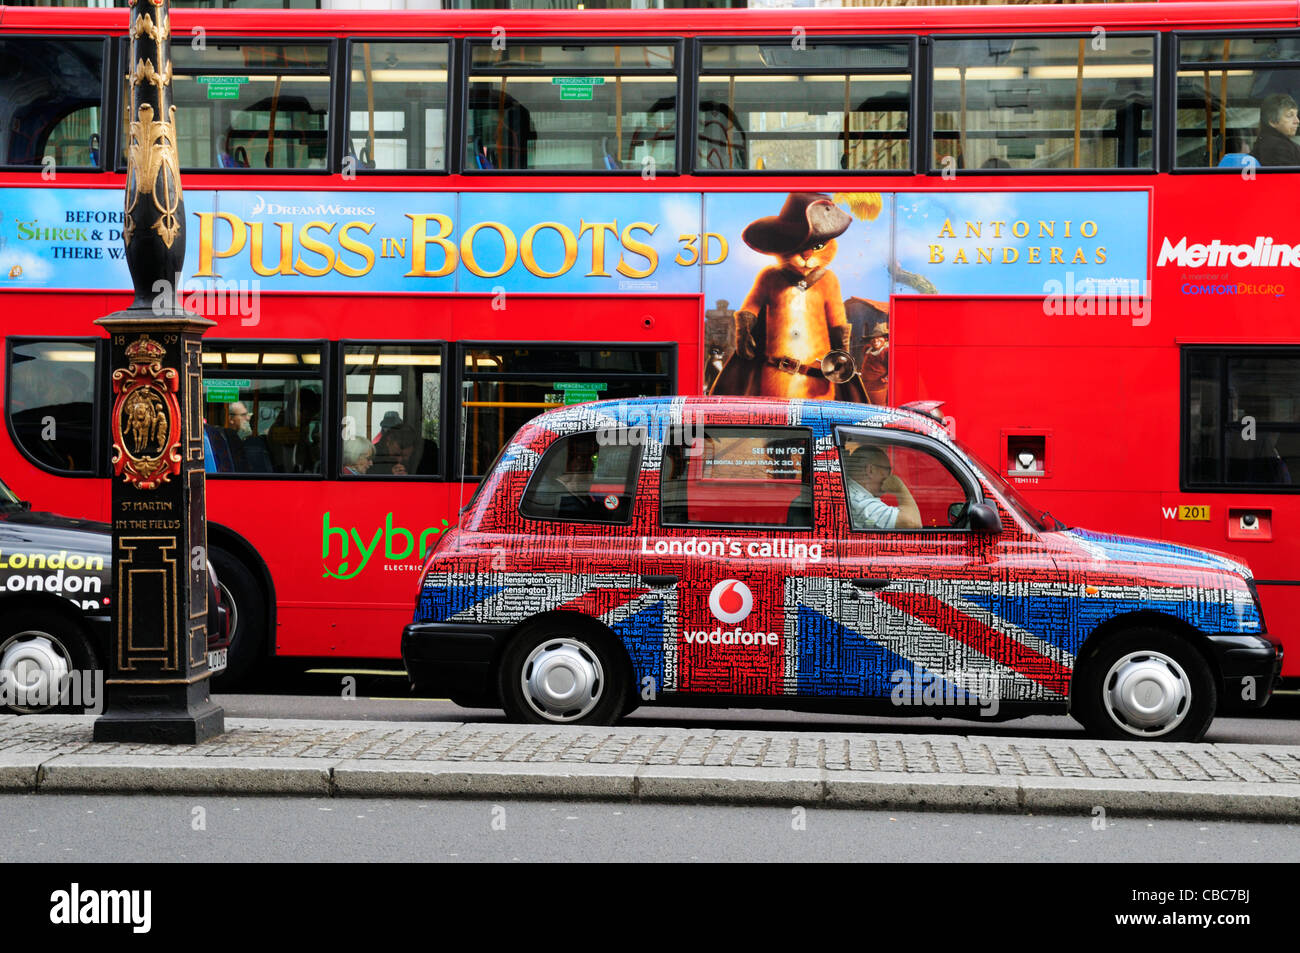 London Bus and Taxi, The Strand, London, England, UK Stock Photo